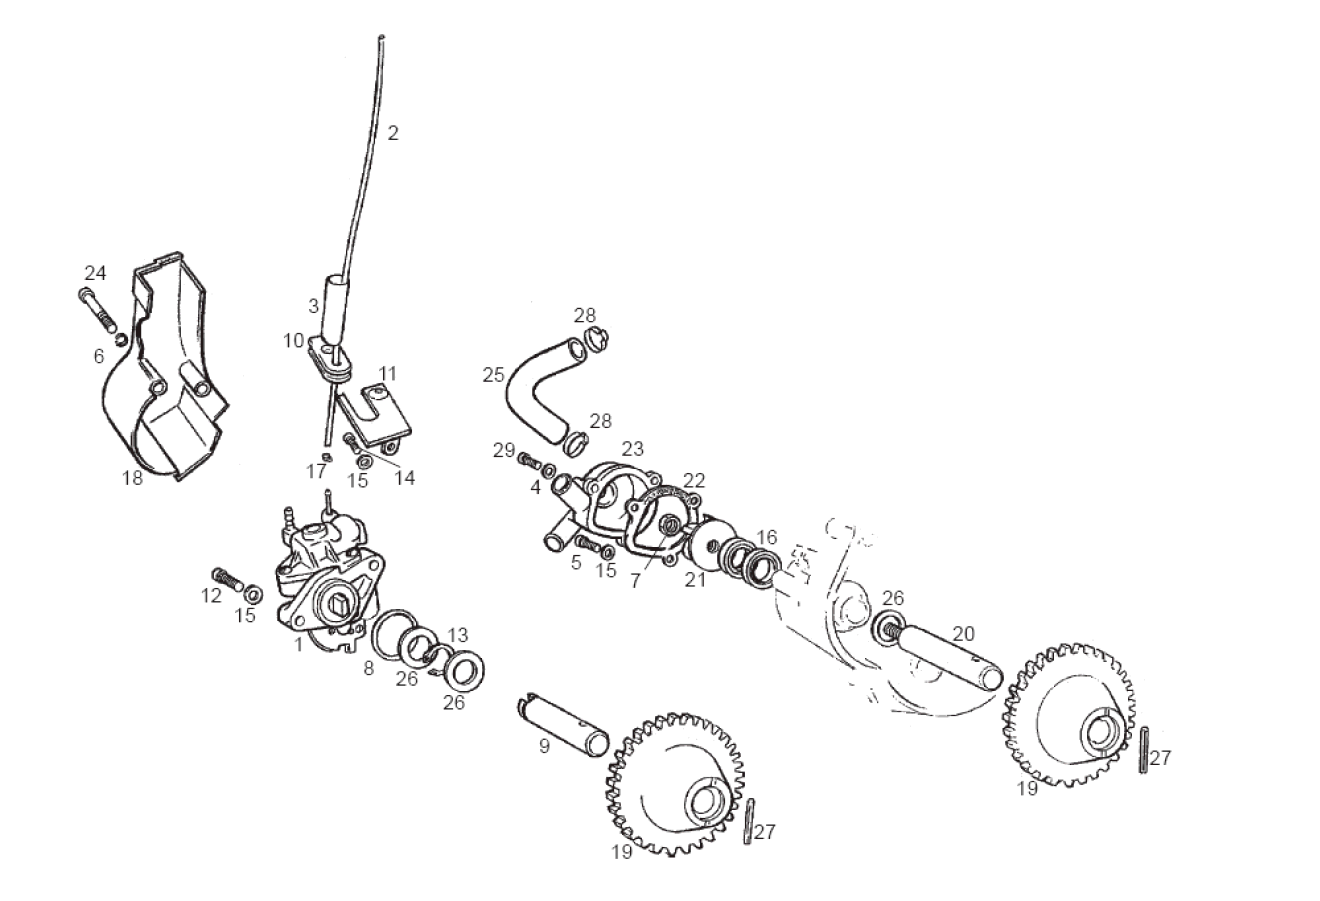 Exploded view Koelsysteem